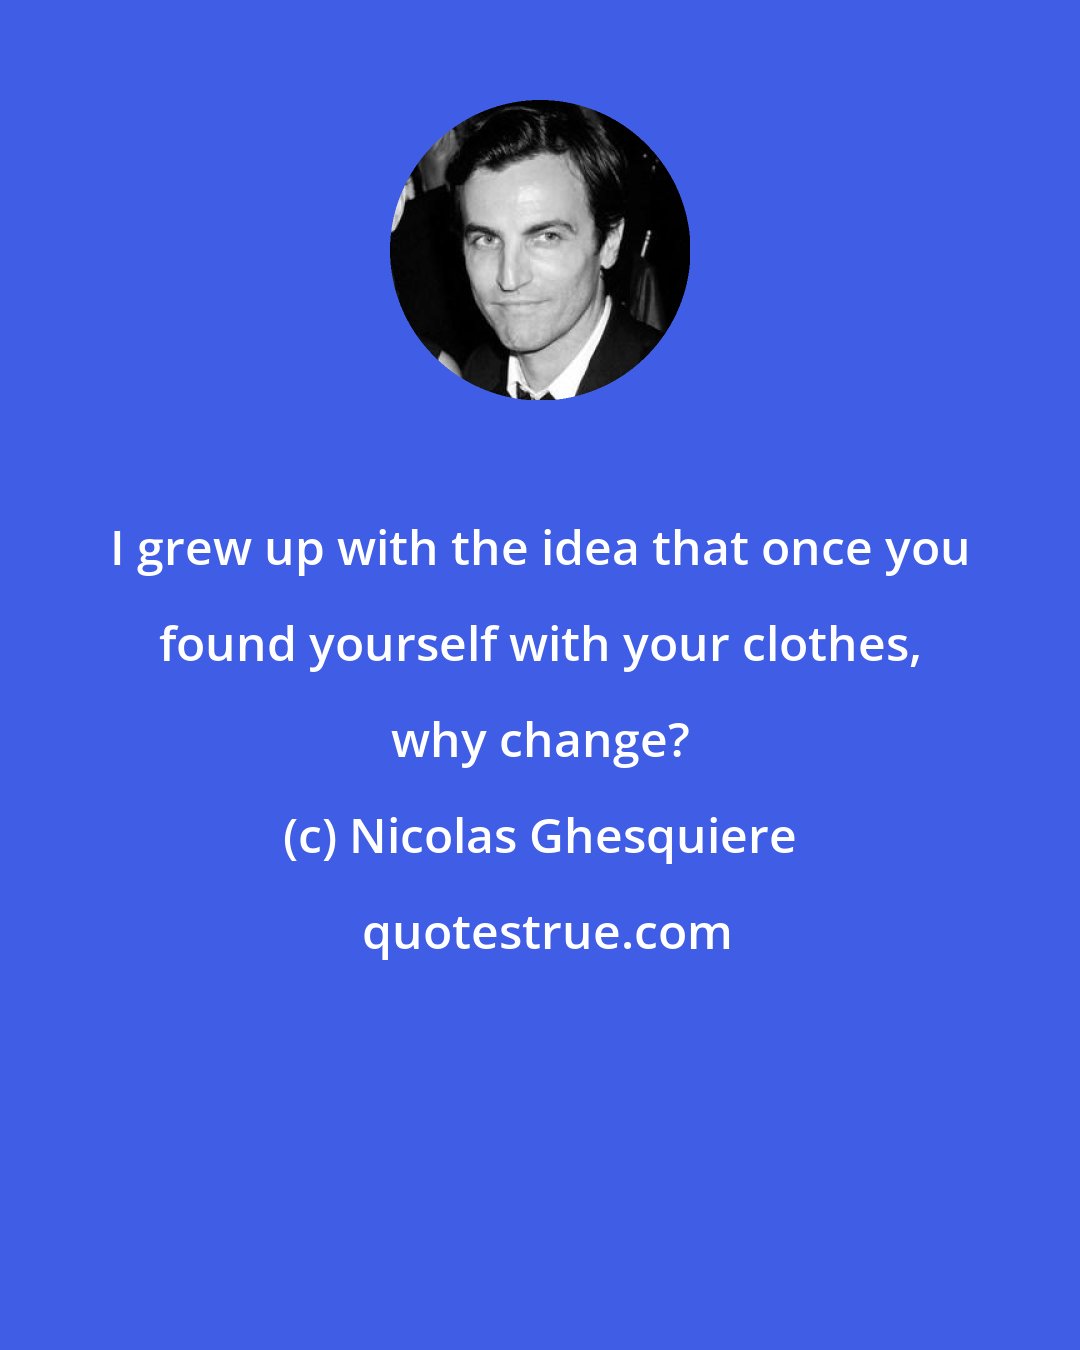 Nicolas Ghesquiere: I grew up with the idea that once you found yourself with your clothes, why change?